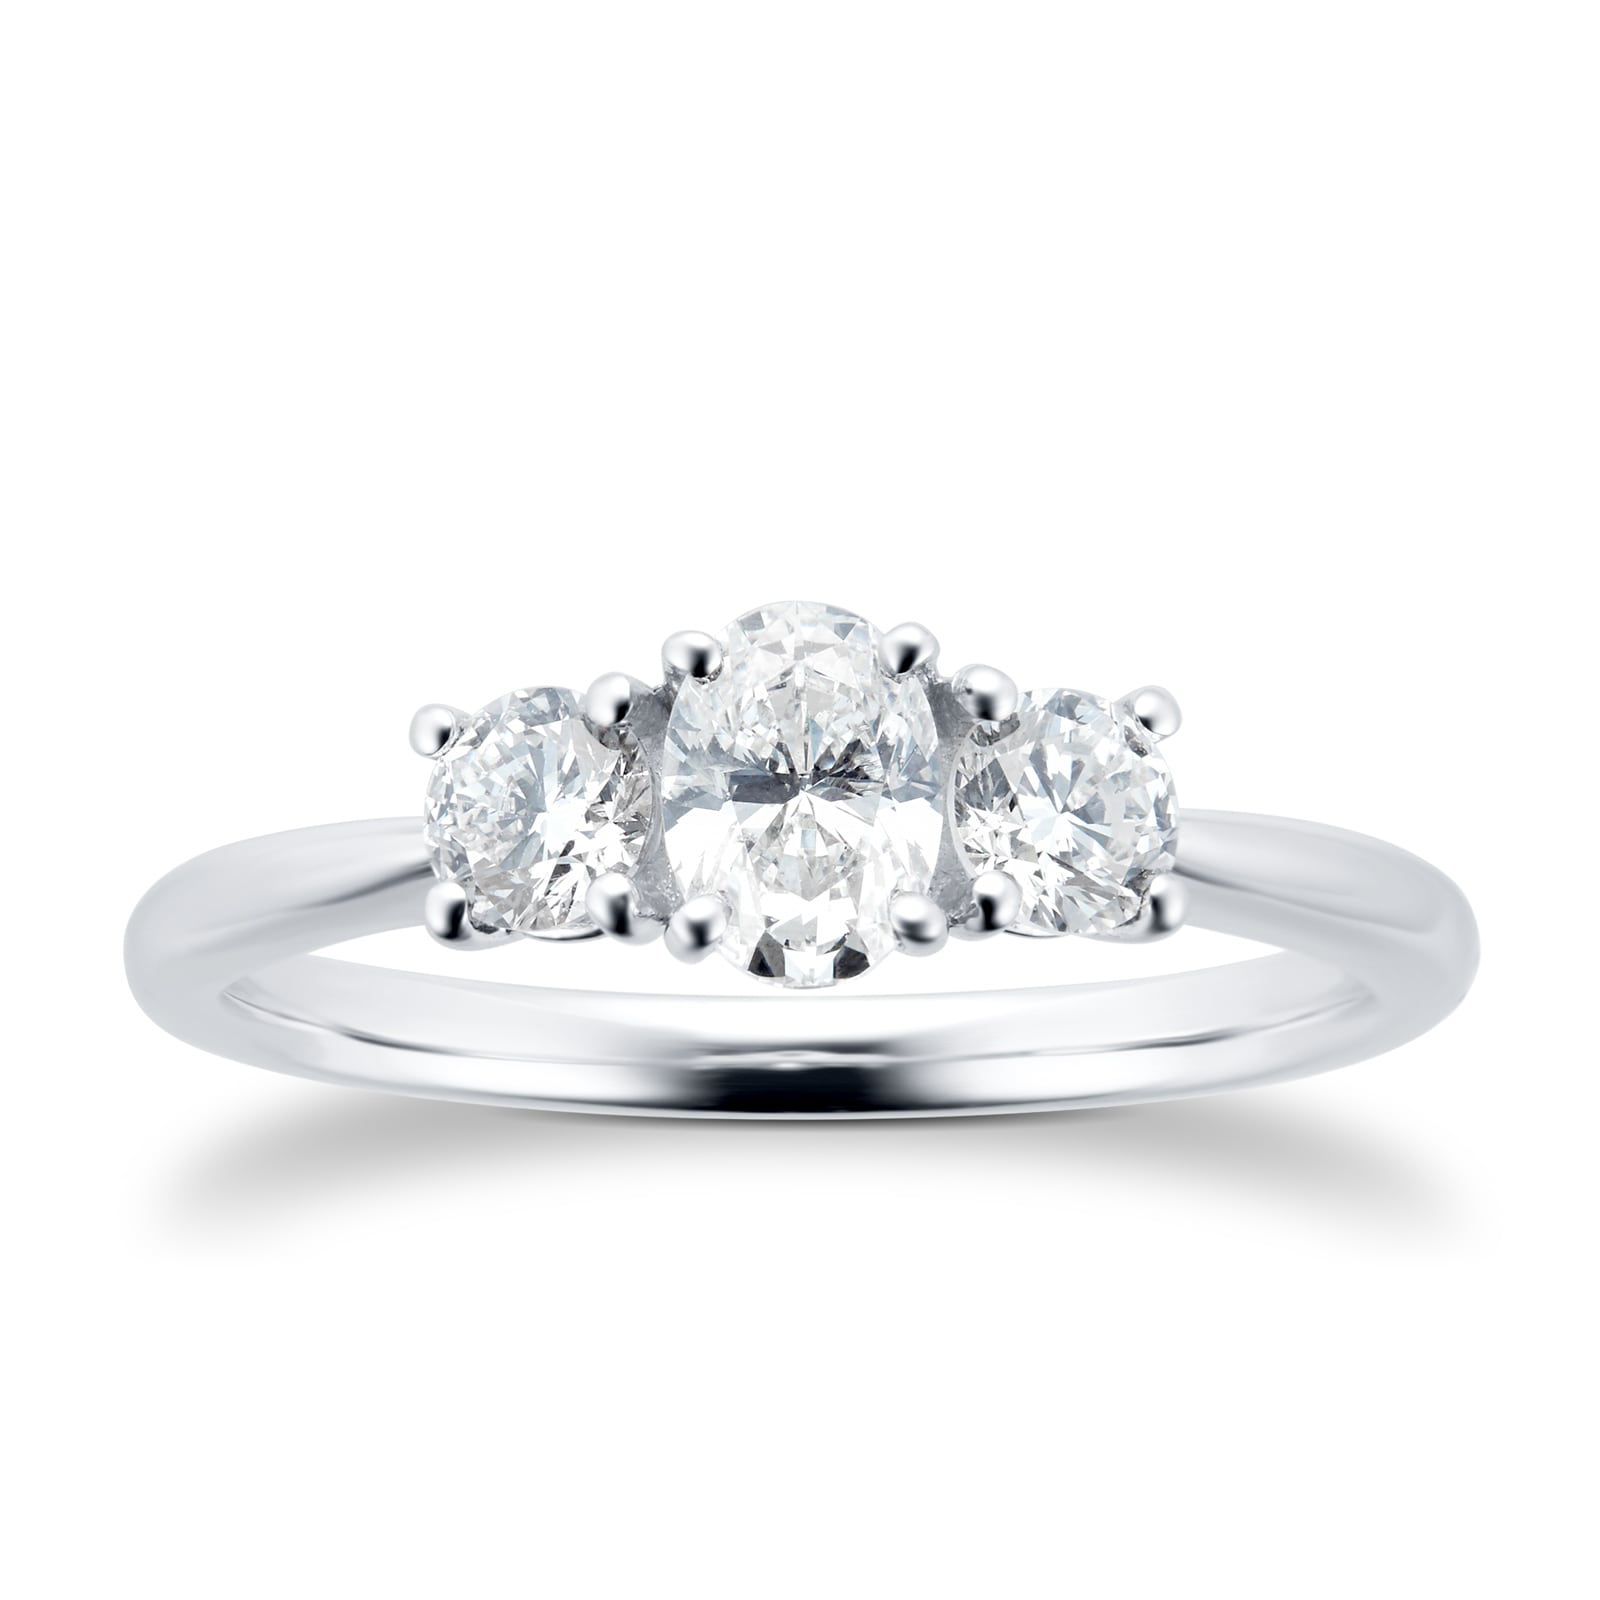 Platinum 0.76cttw Diamond Thee Stone Oval & Brilliant Cut Engagement Ring - Ring Size L